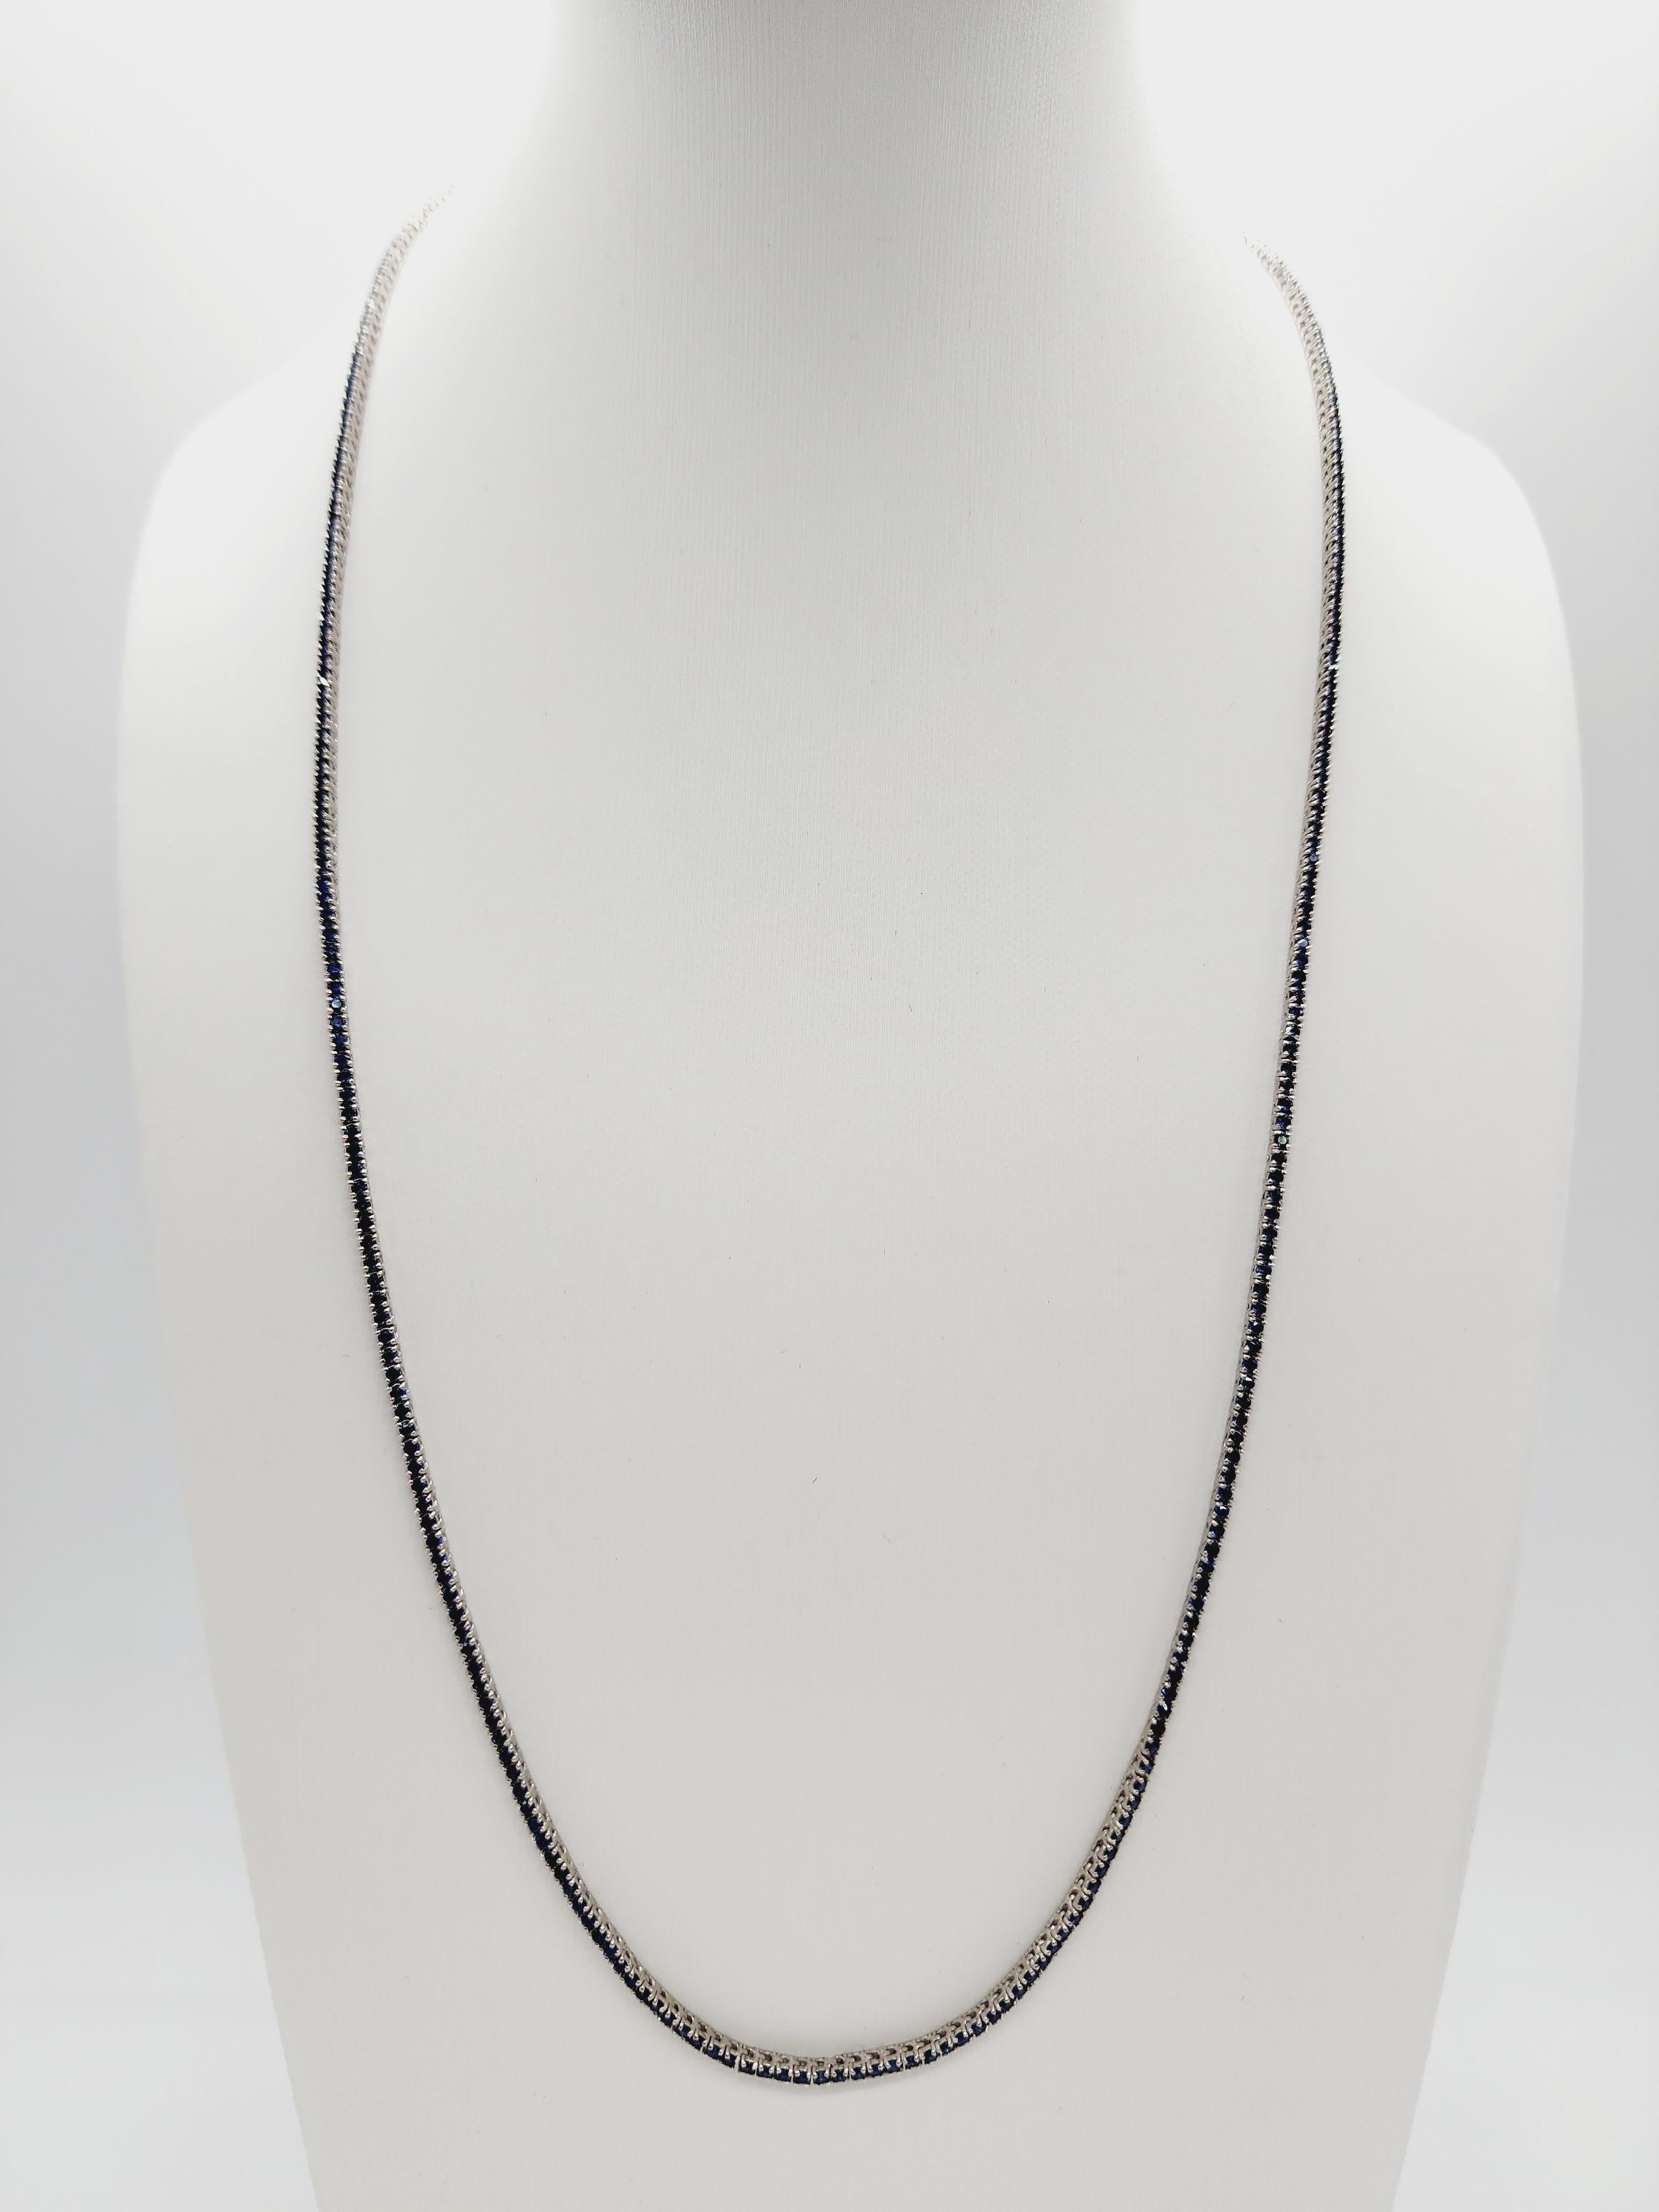 SAPPHIRE TENNIS NECKLACE WHITE GOLD 14K, 
16 INCH, 1.5 MM WIDE.

All sapphire are natural, not treated.